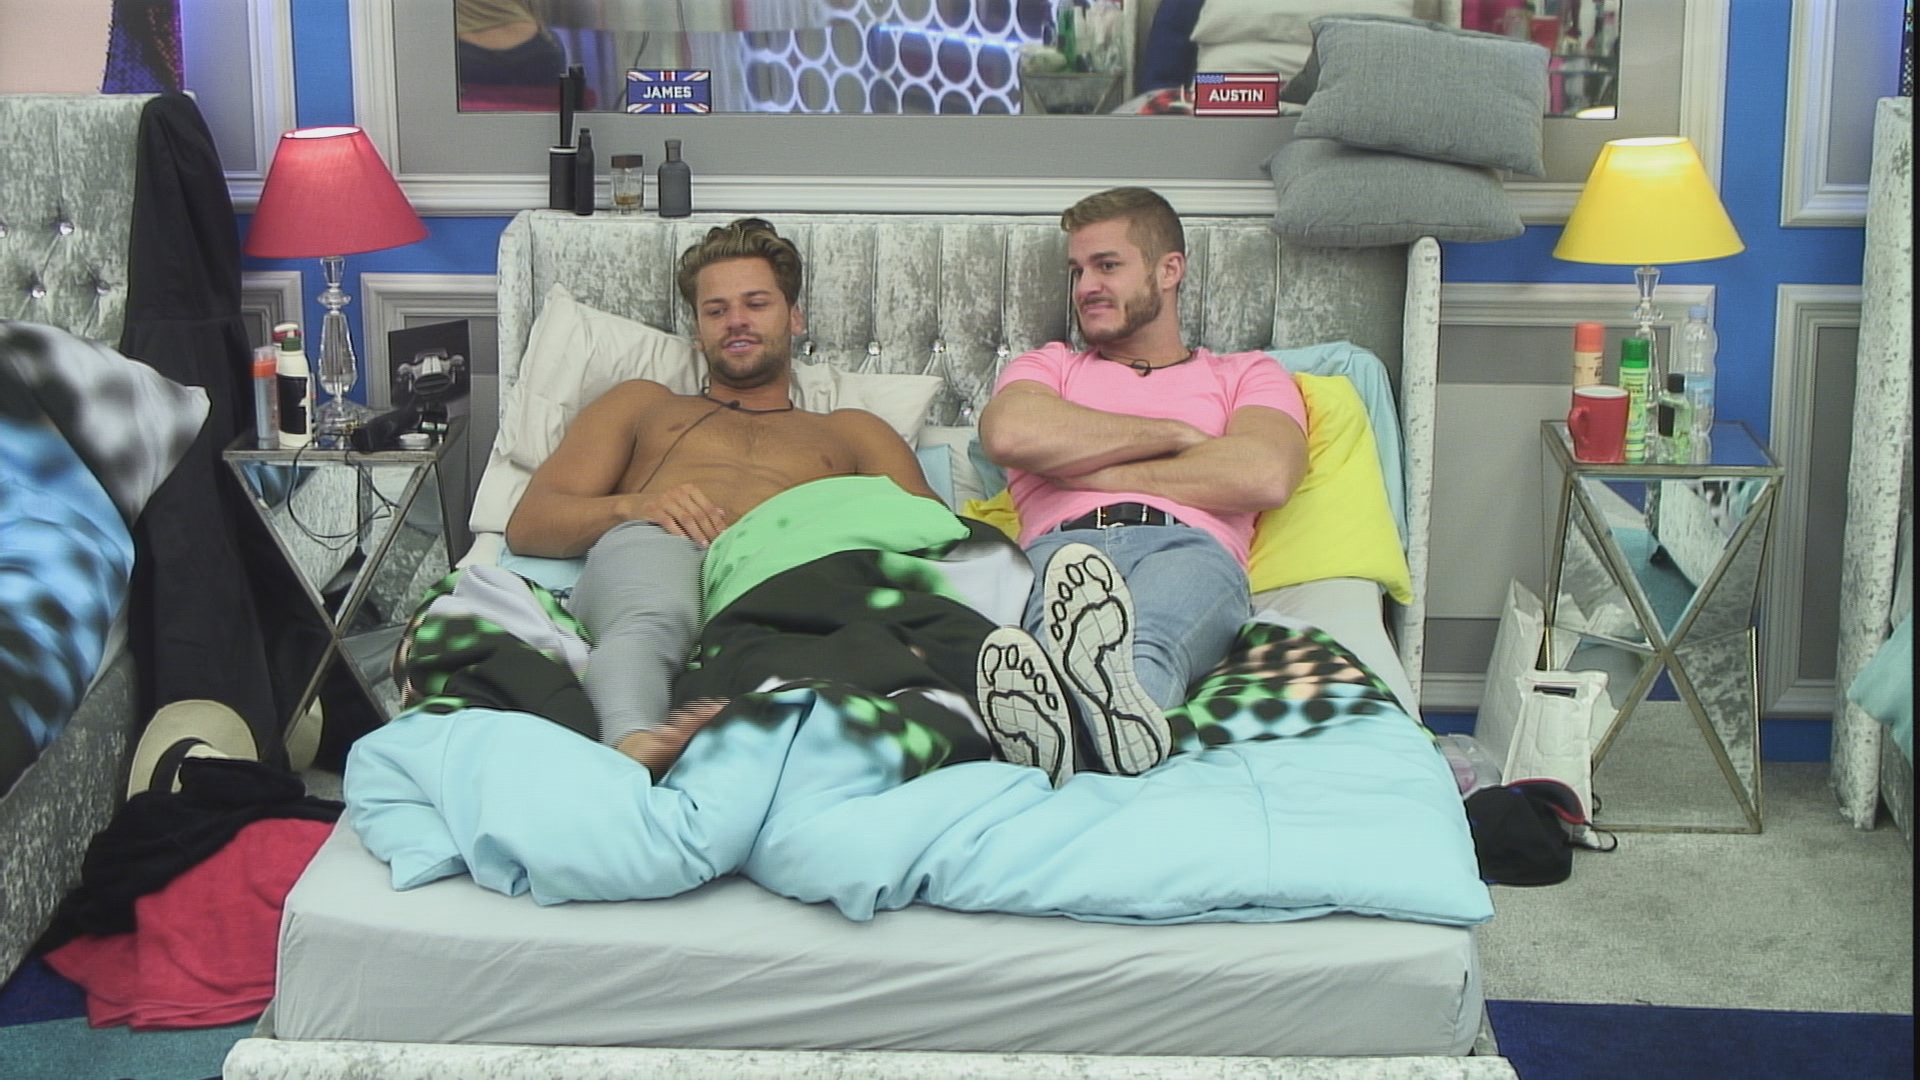 Day 5: Austin discusses friendship with James in Diary Room